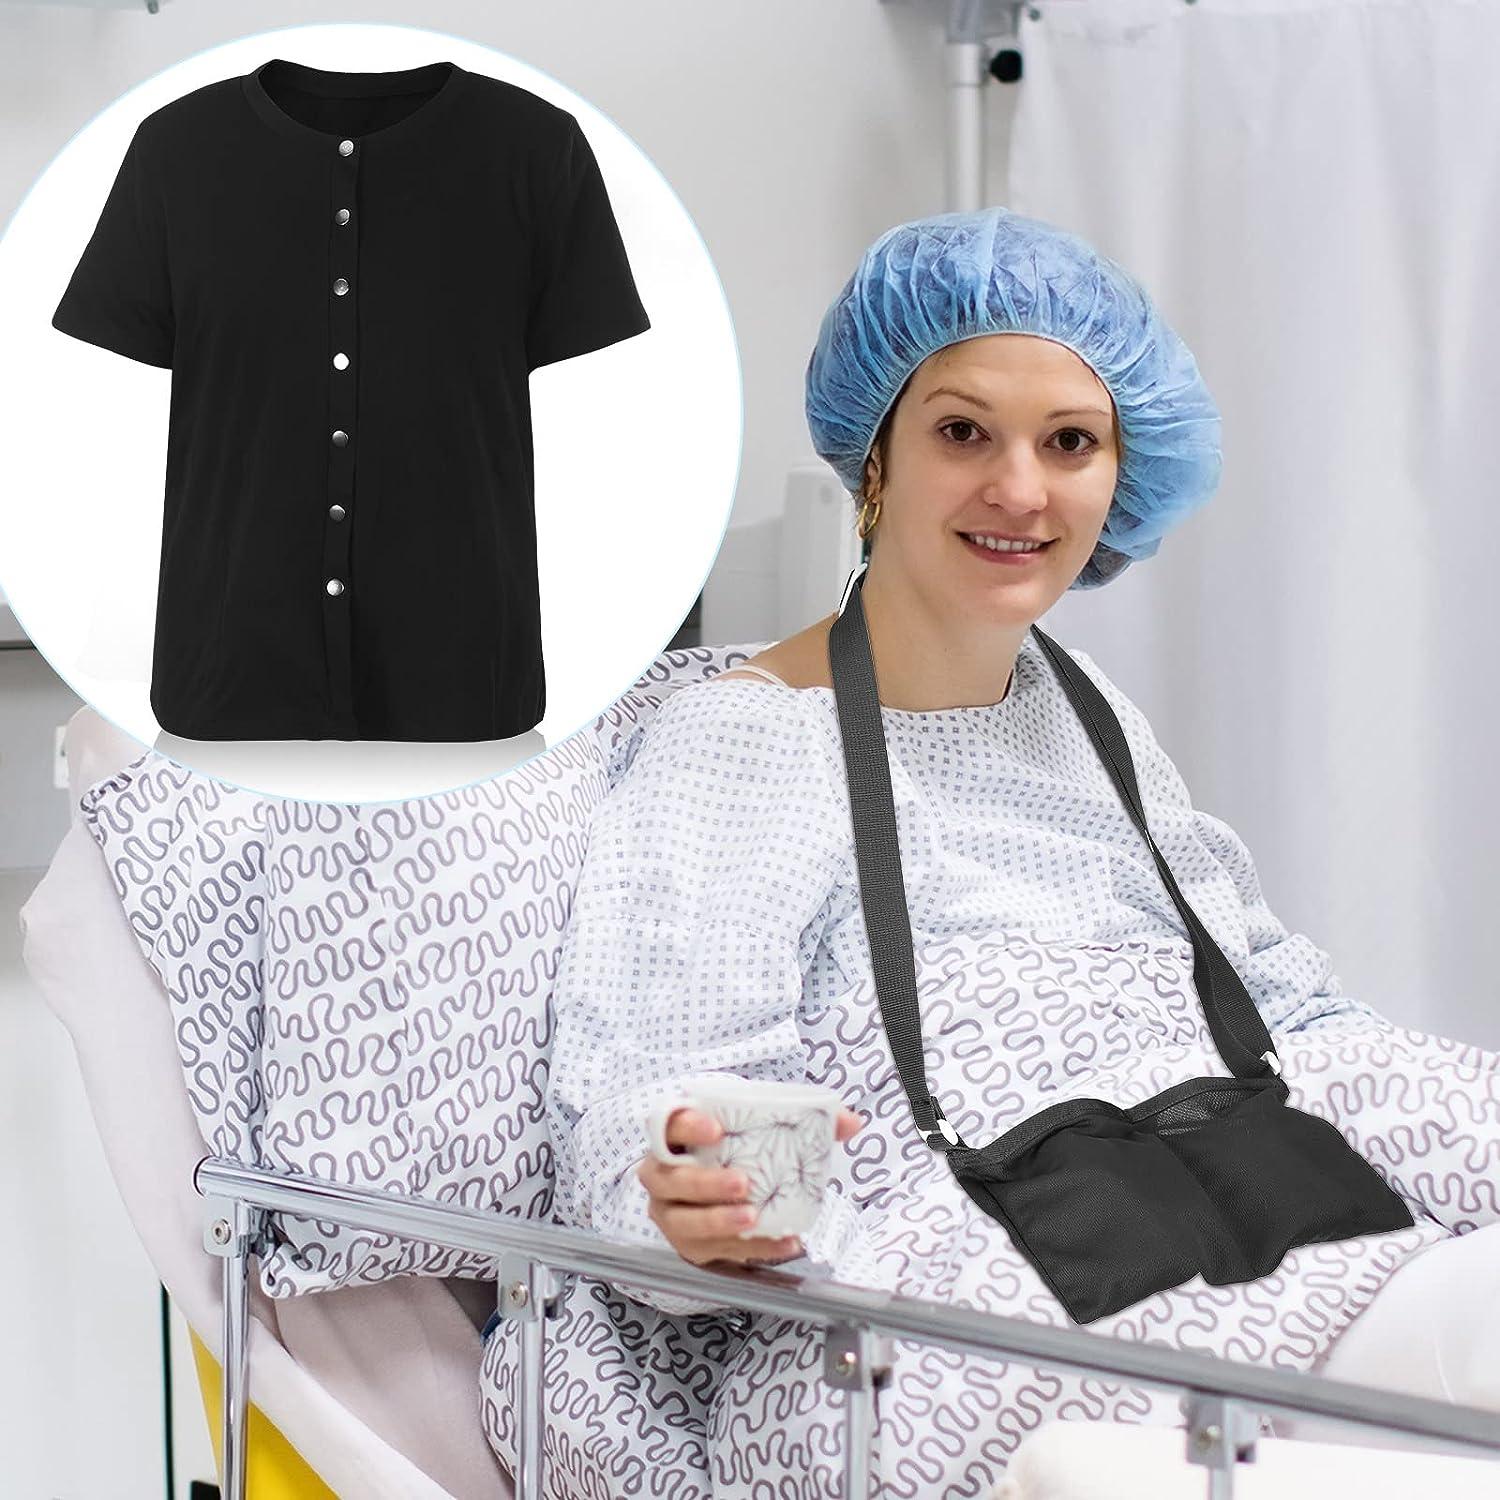 Post Surgical Recovery Shirt